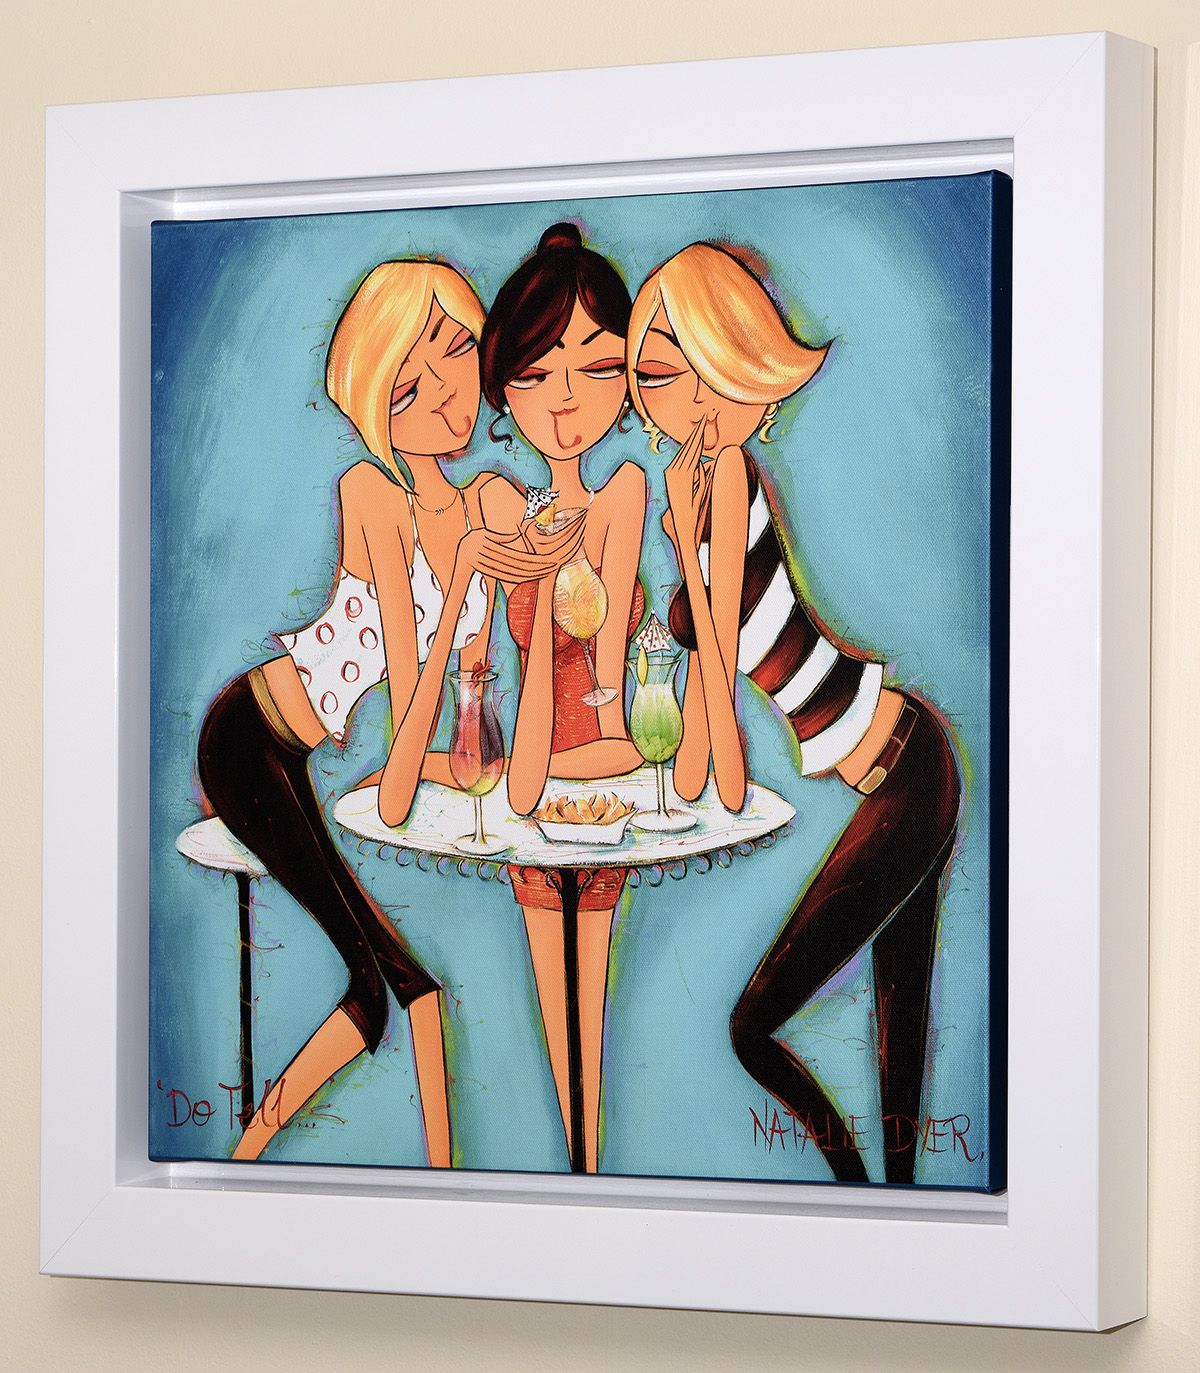 Natalie Dyer - 'Do Tell' - Limited Edition Print  - Women With Attitude Series